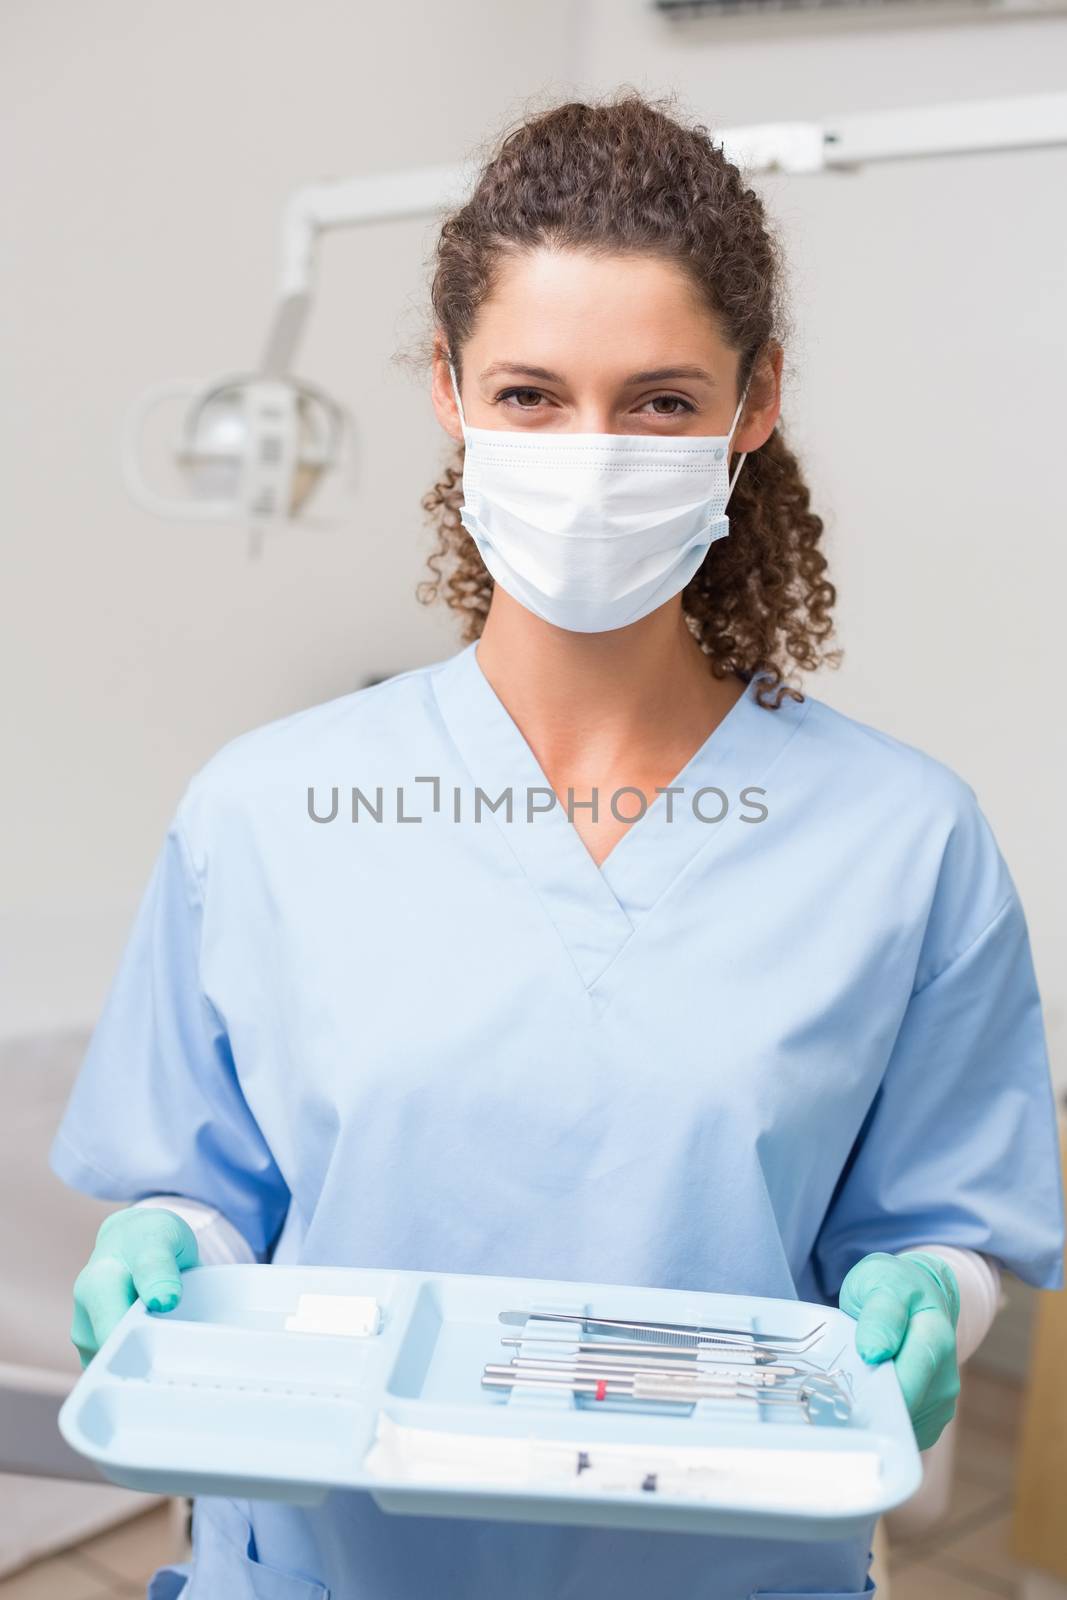 Dentist in blue scrubs holding tray of tools by Wavebreakmedia